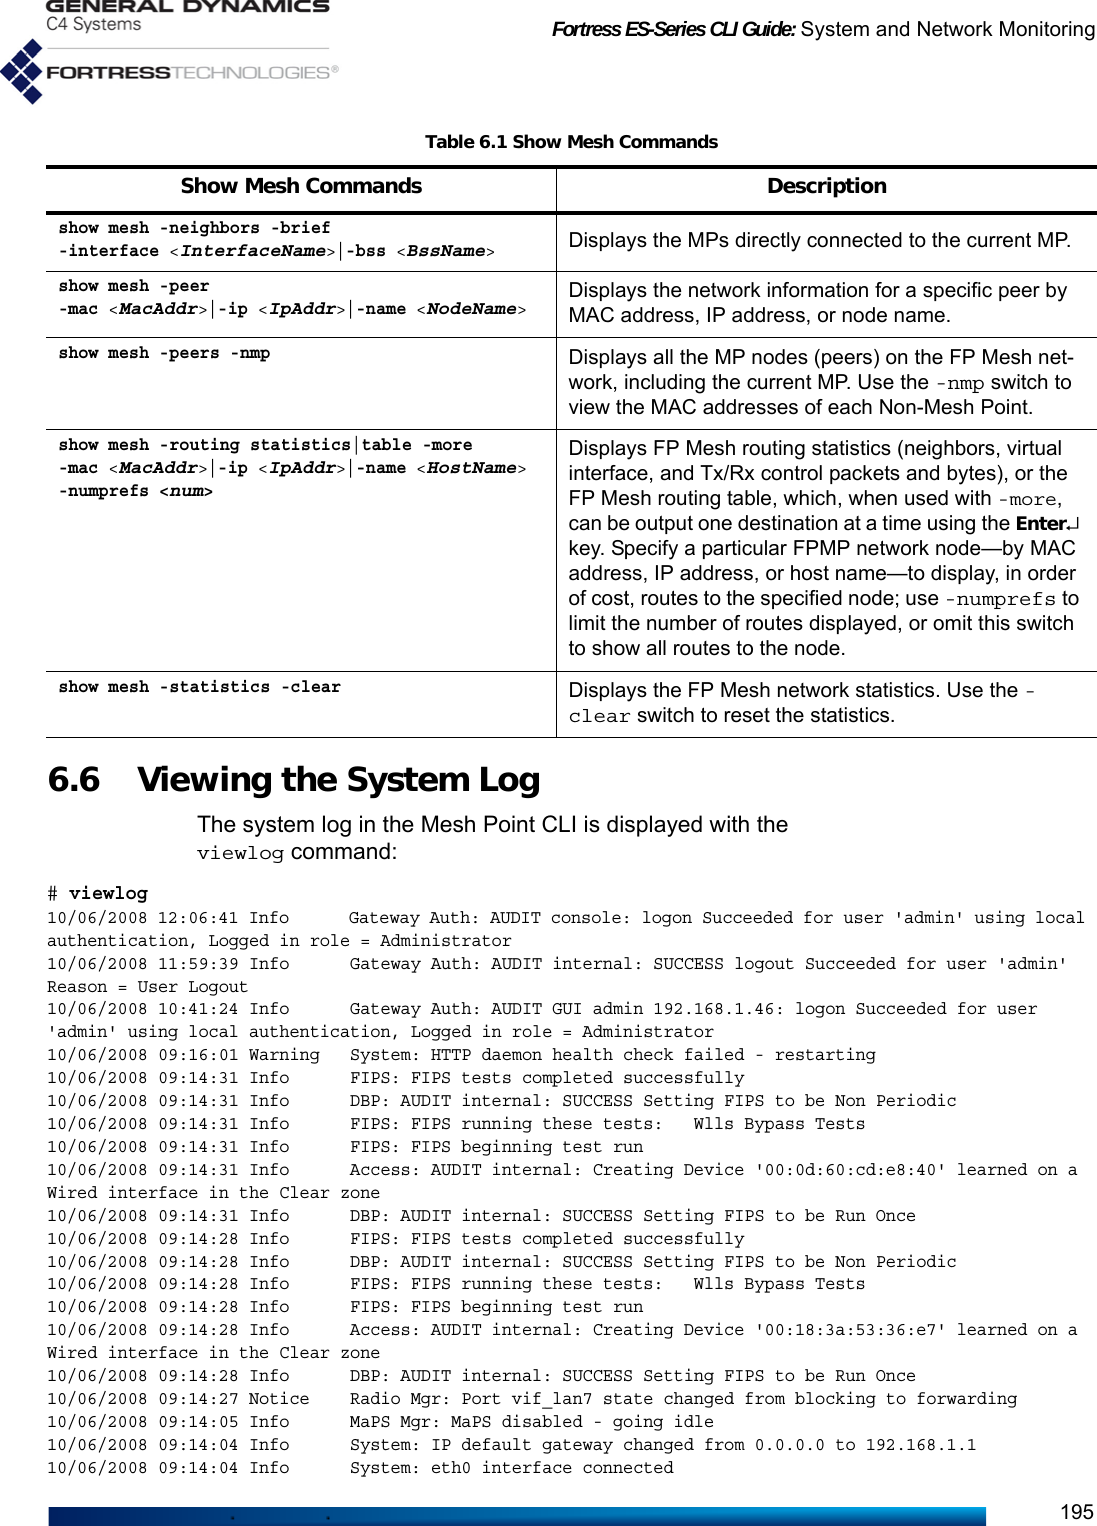 Fortress ES-Series CLI Guide: System and Network Monitoring1956.6 Viewing the System Log The system log in the Mesh Point CLI is displayed with the viewlog command:# viewlog10/06/2008 12:06:41 Info      Gateway Auth: AUDIT console: logon Succeeded for user &apos;admin&apos; using local authentication, Logged in role = Administrator10/06/2008 11:59:39 Info      Gateway Auth: AUDIT internal: SUCCESS logout Succeeded for user &apos;admin&apos; Reason = User Logout10/06/2008 10:41:24 Info      Gateway Auth: AUDIT GUI admin 192.168.1.46: logon Succeeded for user &apos;admin&apos; using local authentication, Logged in role = Administrator10/06/2008 09:16:01 Warning   System: HTTP daemon health check failed - restarting10/06/2008 09:14:31 Info      FIPS: FIPS tests completed successfully10/06/2008 09:14:31 Info      DBP: AUDIT internal: SUCCESS Setting FIPS to be Non Periodic10/06/2008 09:14:31 Info      FIPS: FIPS running these tests:   Wlls Bypass Tests10/06/2008 09:14:31 Info      FIPS: FIPS beginning test run10/06/2008 09:14:31 Info      Access: AUDIT internal: Creating Device &apos;00:0d:60:cd:e8:40&apos; learned on a Wired interface in the Clear zone10/06/2008 09:14:31 Info      DBP: AUDIT internal: SUCCESS Setting FIPS to be Run Once10/06/2008 09:14:28 Info      FIPS: FIPS tests completed successfully10/06/2008 09:14:28 Info      DBP: AUDIT internal: SUCCESS Setting FIPS to be Non Periodic10/06/2008 09:14:28 Info      FIPS: FIPS running these tests:   Wlls Bypass Tests10/06/2008 09:14:28 Info      FIPS: FIPS beginning test run10/06/2008 09:14:28 Info      Access: AUDIT internal: Creating Device &apos;00:18:3a:53:36:e7&apos; learned on a Wired interface in the Clear zone10/06/2008 09:14:28 Info      DBP: AUDIT internal: SUCCESS Setting FIPS to be Run Once10/06/2008 09:14:27 Notice    Radio Mgr: Port vif_lan7 state changed from blocking to forwarding10/06/2008 09:14:05 Info      MaPS Mgr: MaPS disabled - going idle10/06/2008 09:14:04 Info      System: IP default gateway changed from 0.0.0.0 to 192.168.1.110/06/2008 09:14:04 Info      System: eth0 interface connectedshow mesh -neighbors -brief-interface &lt;InterfaceName&gt;|-bss &lt;BssName&gt; Displays the MPs directly connected to the current MP.show mesh -peer -mac &lt;MacAddr&gt;|-ip &lt;IpAddr&gt;|-name &lt;NodeName&gt;Displays the network information for a specific peer by MAC address, IP address, or node name.show mesh -peers -nmpDisplays all the MP nodes (peers) on the FP Mesh net-work, including the current MP. Use the -nmp switch to view the MAC addresses of each Non-Mesh Point.show mesh -routing statistics|table -more-mac &lt;MacAddr&gt;|-ip &lt;IpAddr&gt;|-name &lt;HostName&gt;-numprefs &lt;num&gt;Displays FP Mesh routing statistics (neighbors, virtual interface, and Tx/Rx control packets and bytes), or the FP Mesh routing table, which, when used with -more, can be output one destination at a time using the Enter↵ key. Specify a particular FPMP network node—by MAC address, IP address, or host name—to display, in order of cost, routes to the specified node; use -numprefs to limit the number of routes displayed, or omit this switch to show all routes to the node. show mesh -statistics -clearDisplays the FP Mesh network statistics. Use the -clear switch to reset the statistics.Table 6.1 Show Mesh CommandsShow Mesh Commands Description